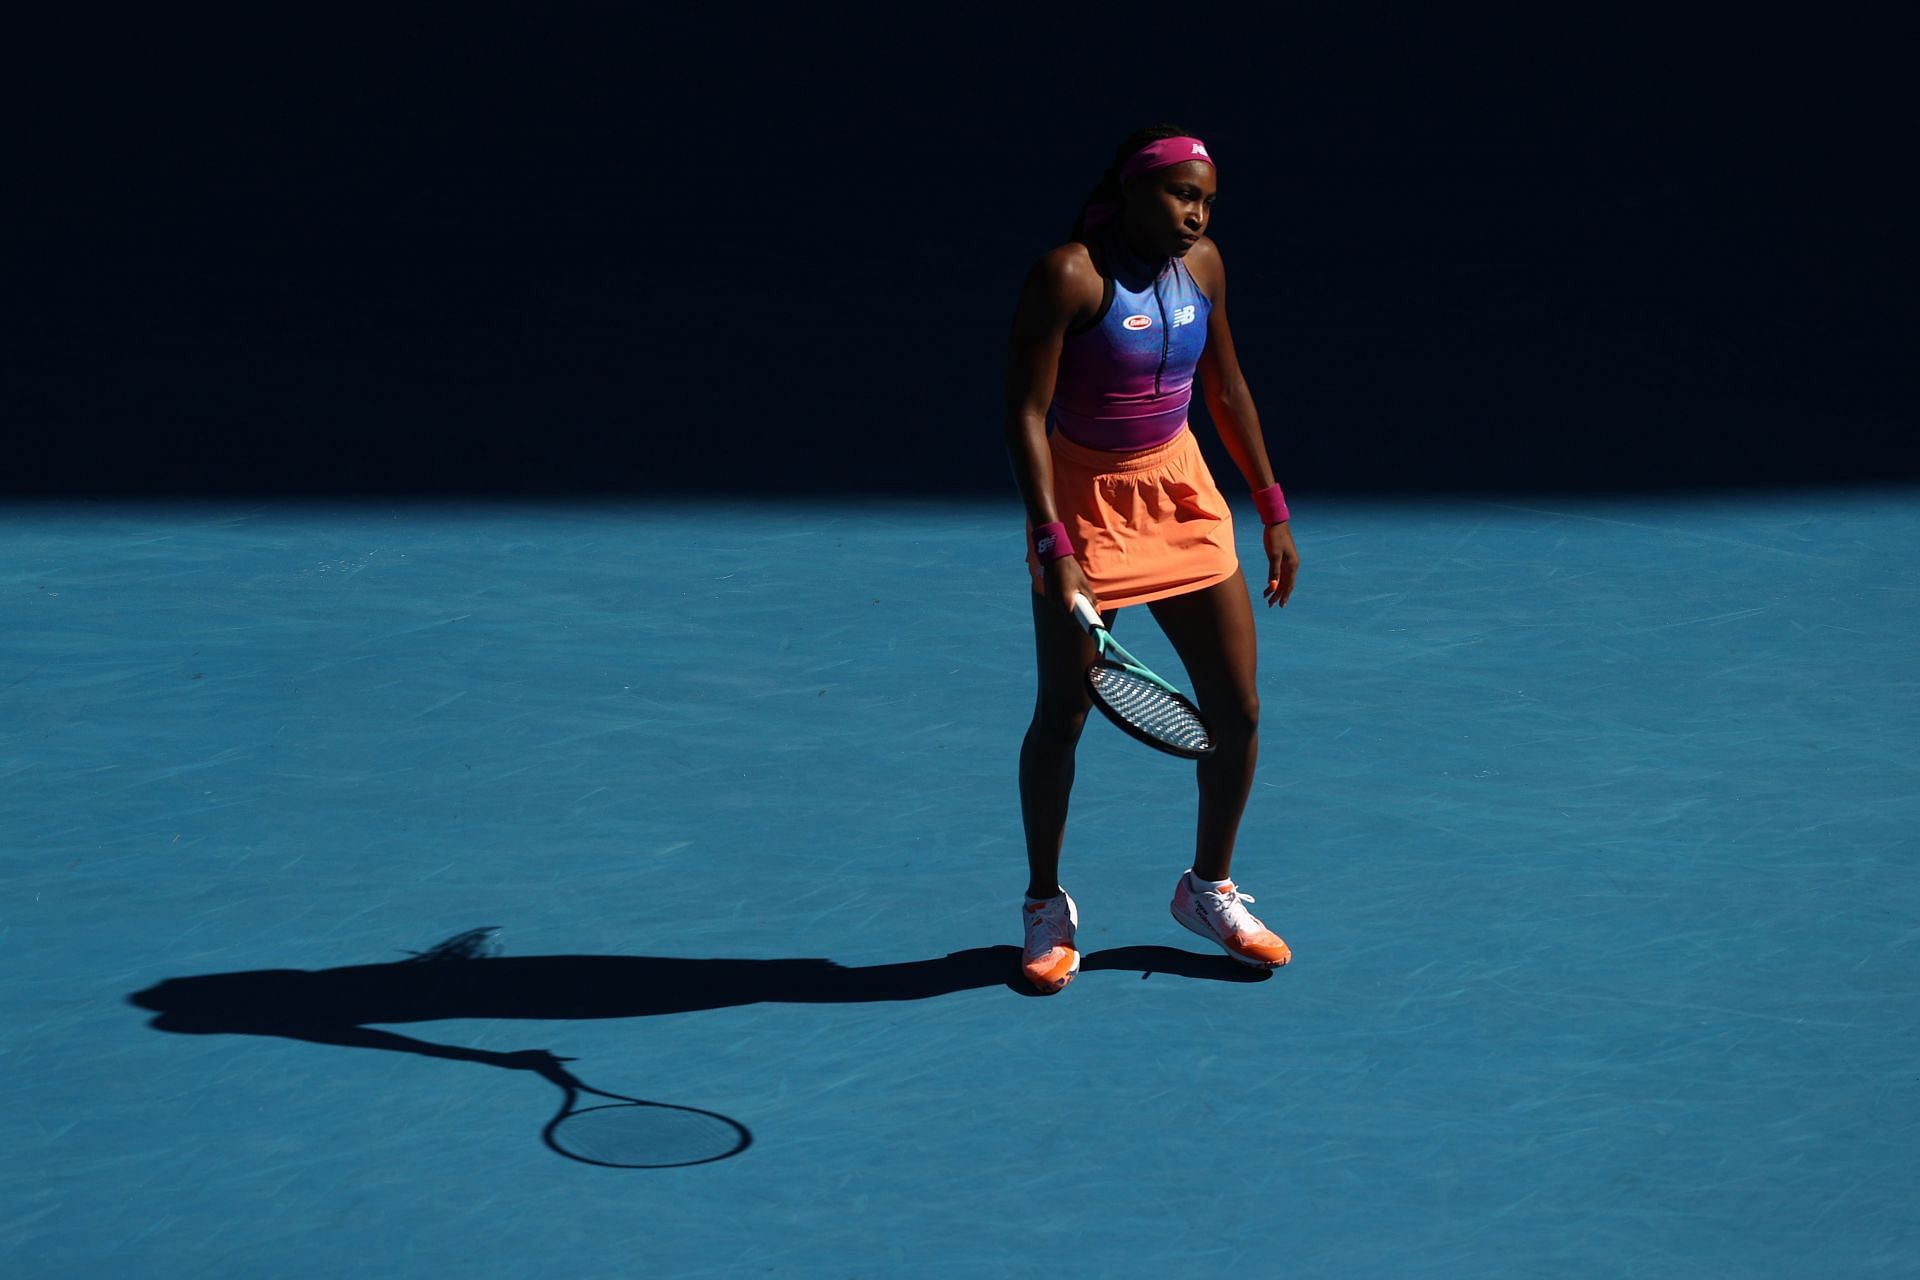 Coco Gauff delivered a powerful speech during a Black Lives Matter protest in 2020